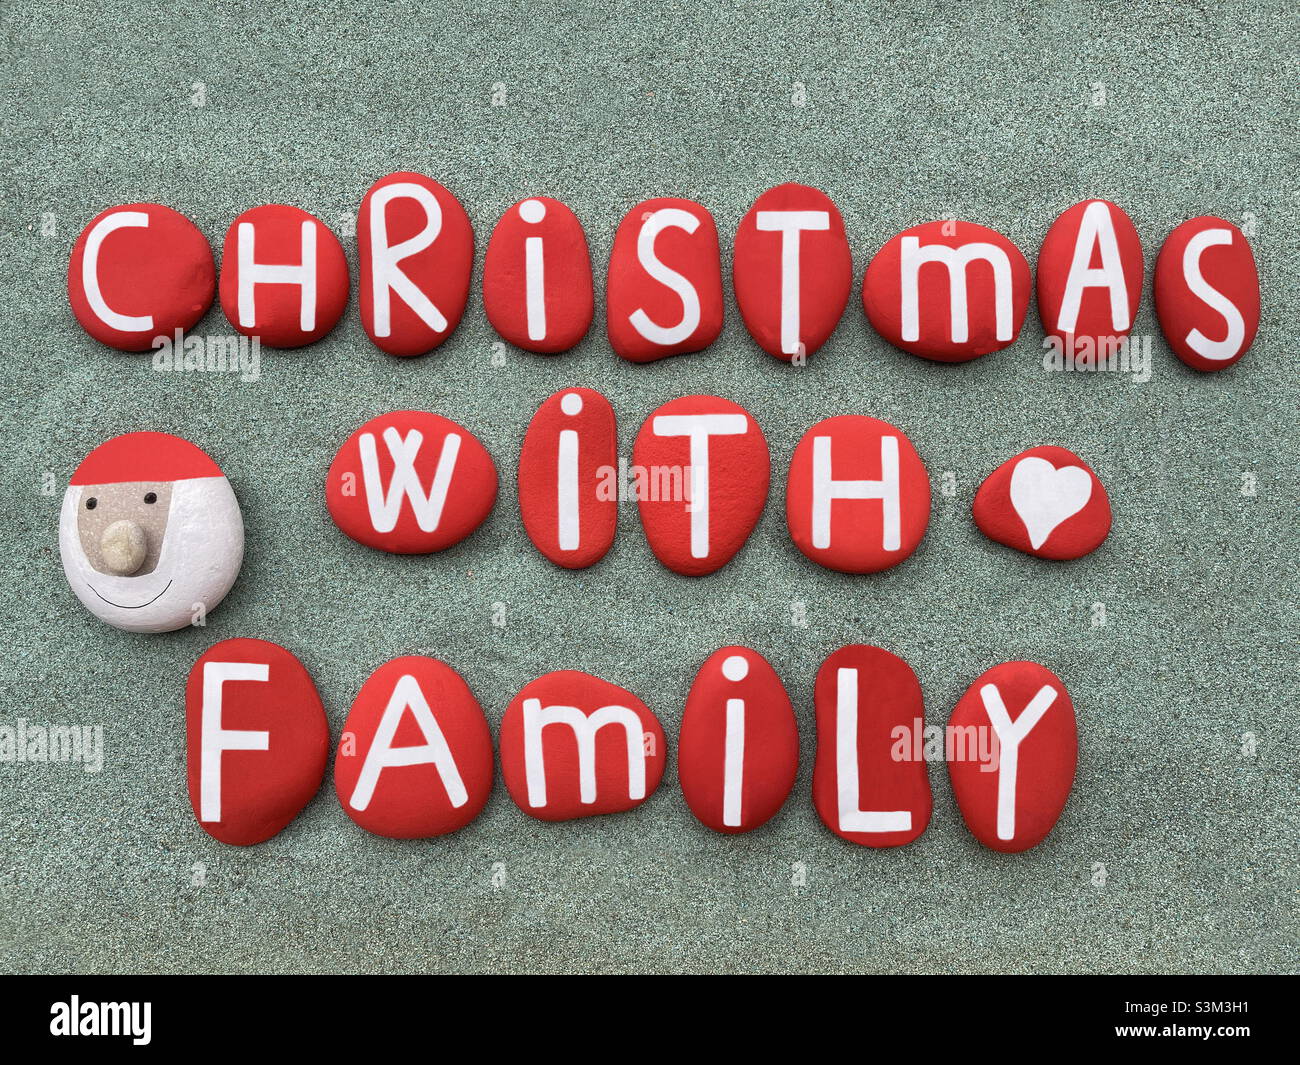 Christmas with family, creative text composed with red colored stone letters and a stone Santa Claus over green sand Stock Photo